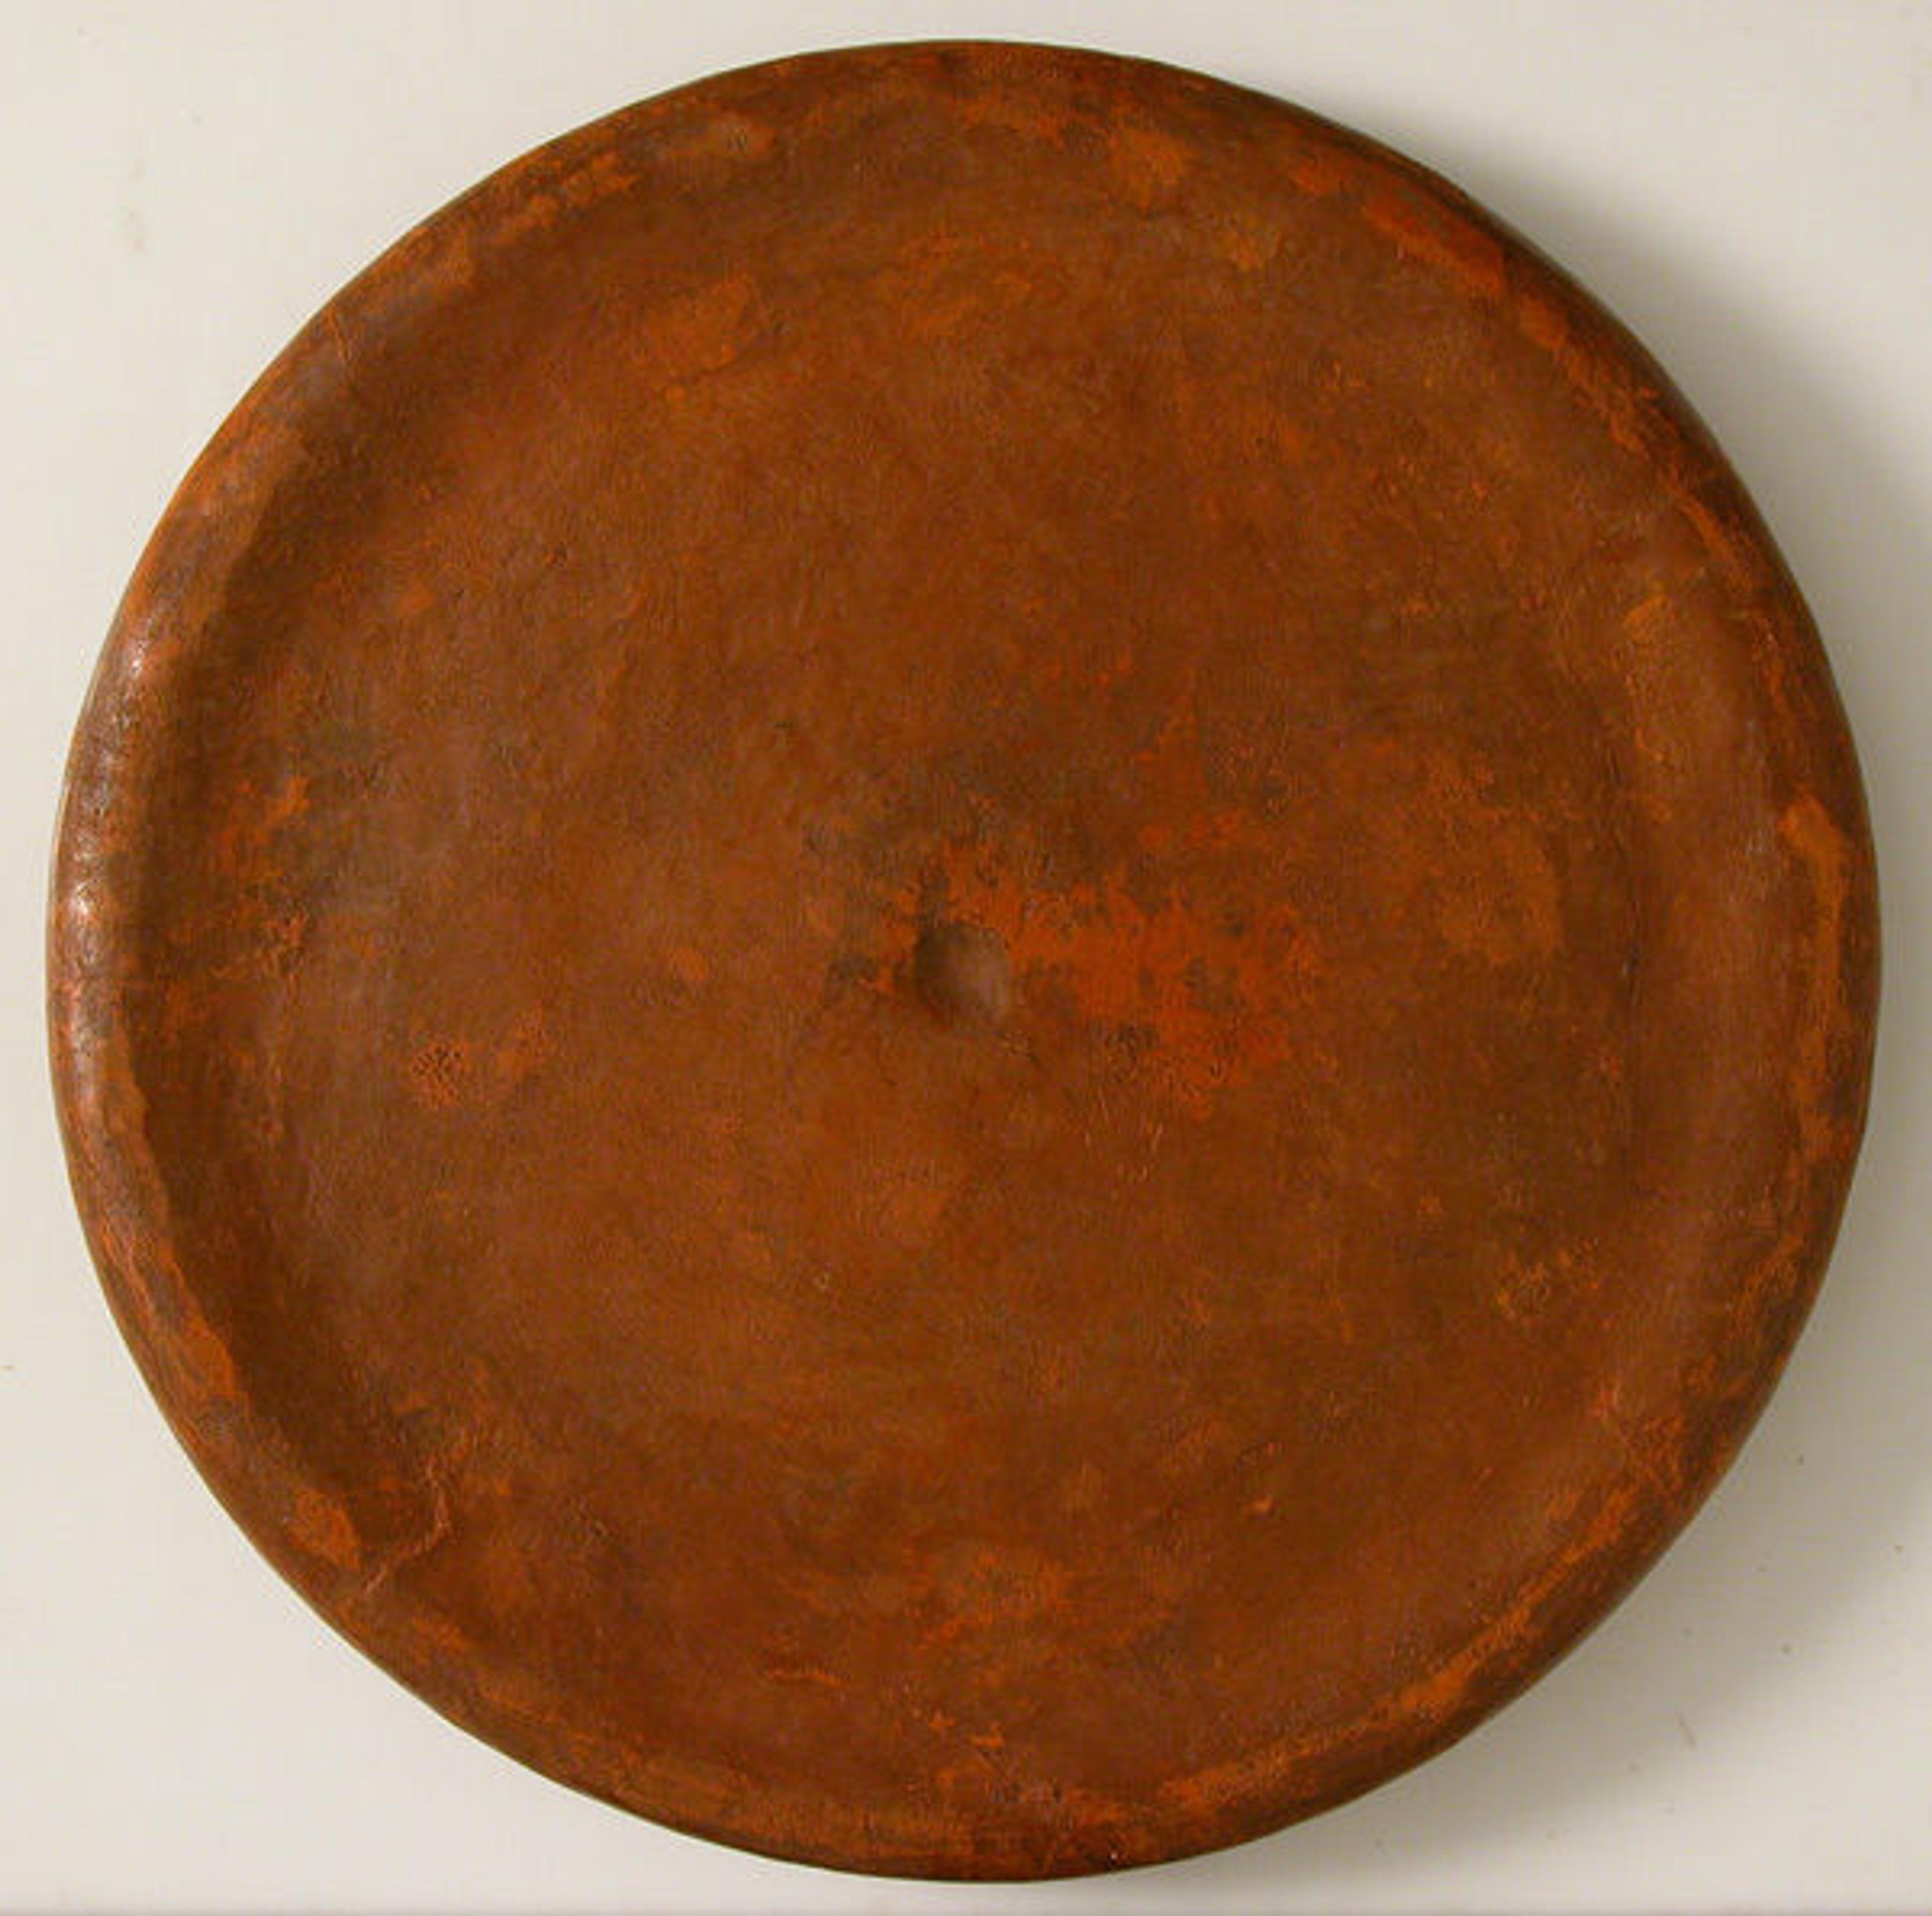 The back of the paten